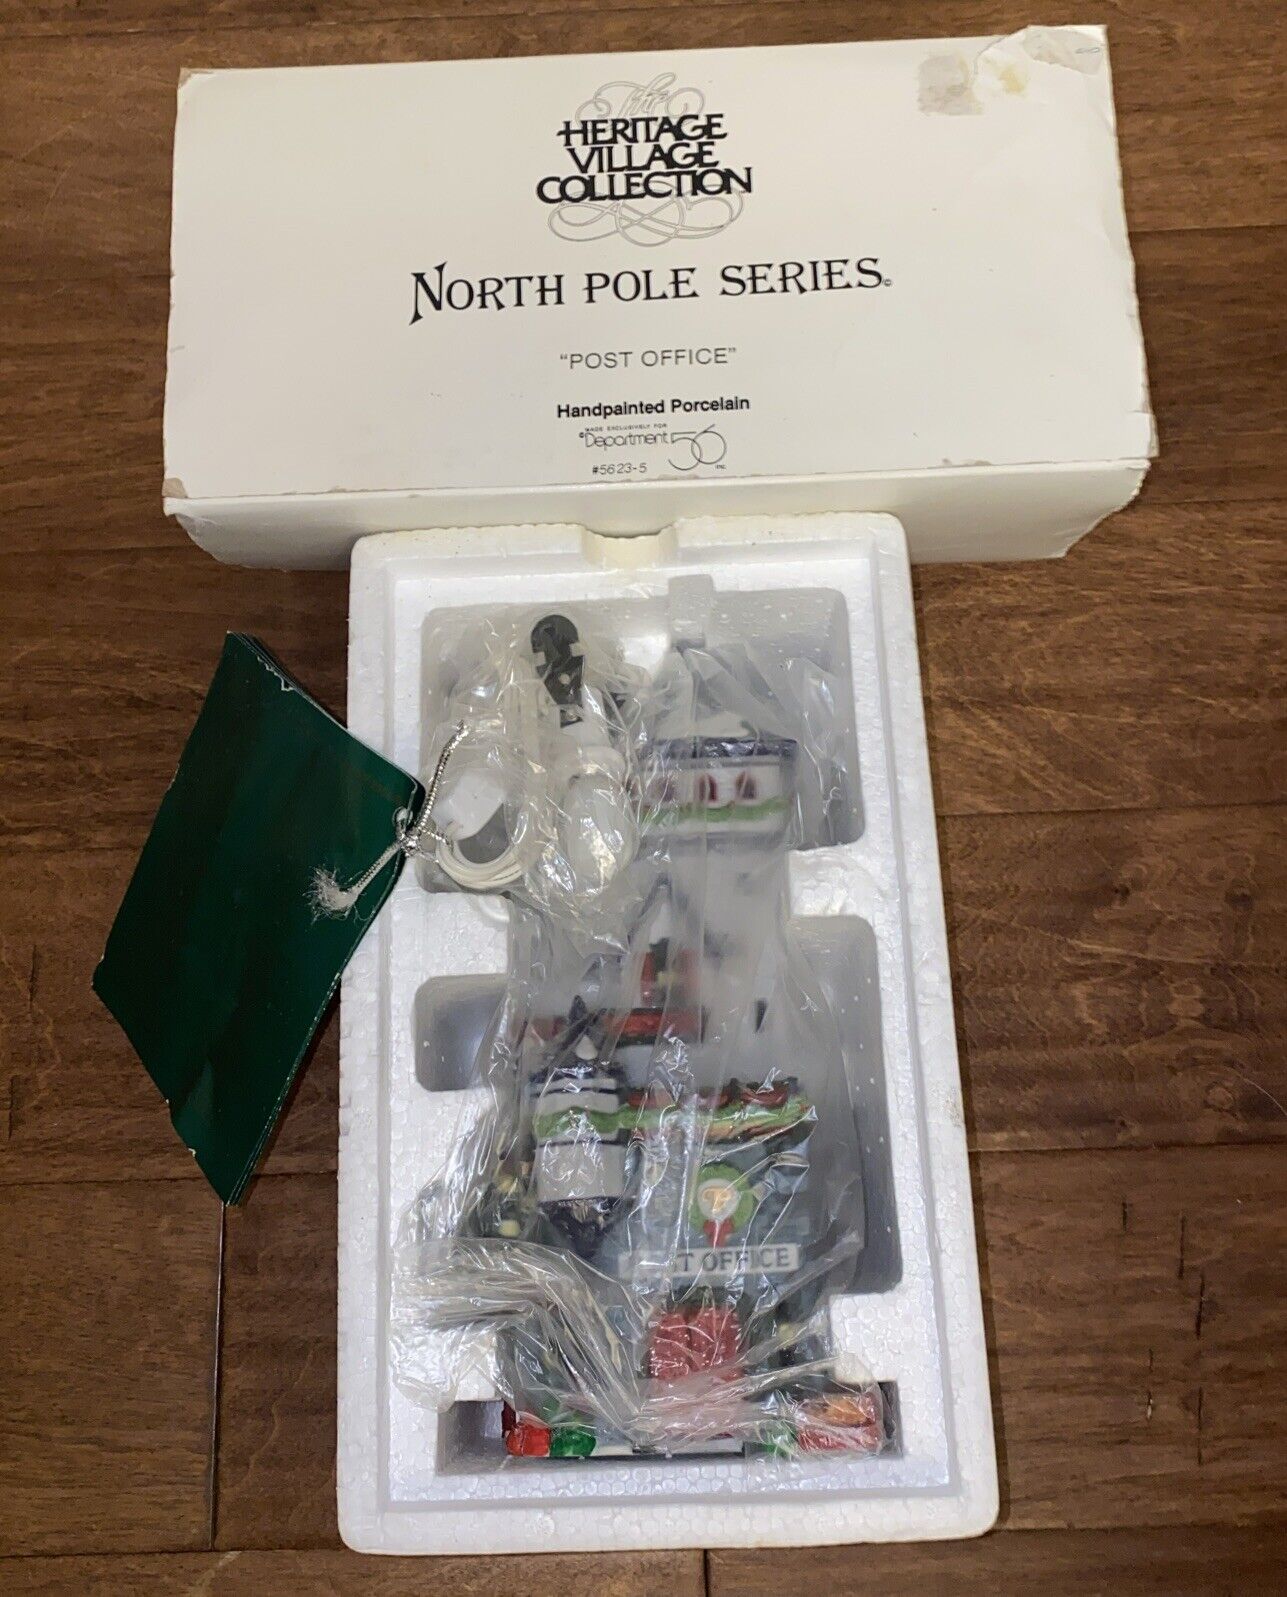 Dept 56 Heritage Village Collection North Pole Series-“ Post Office” #5623-5